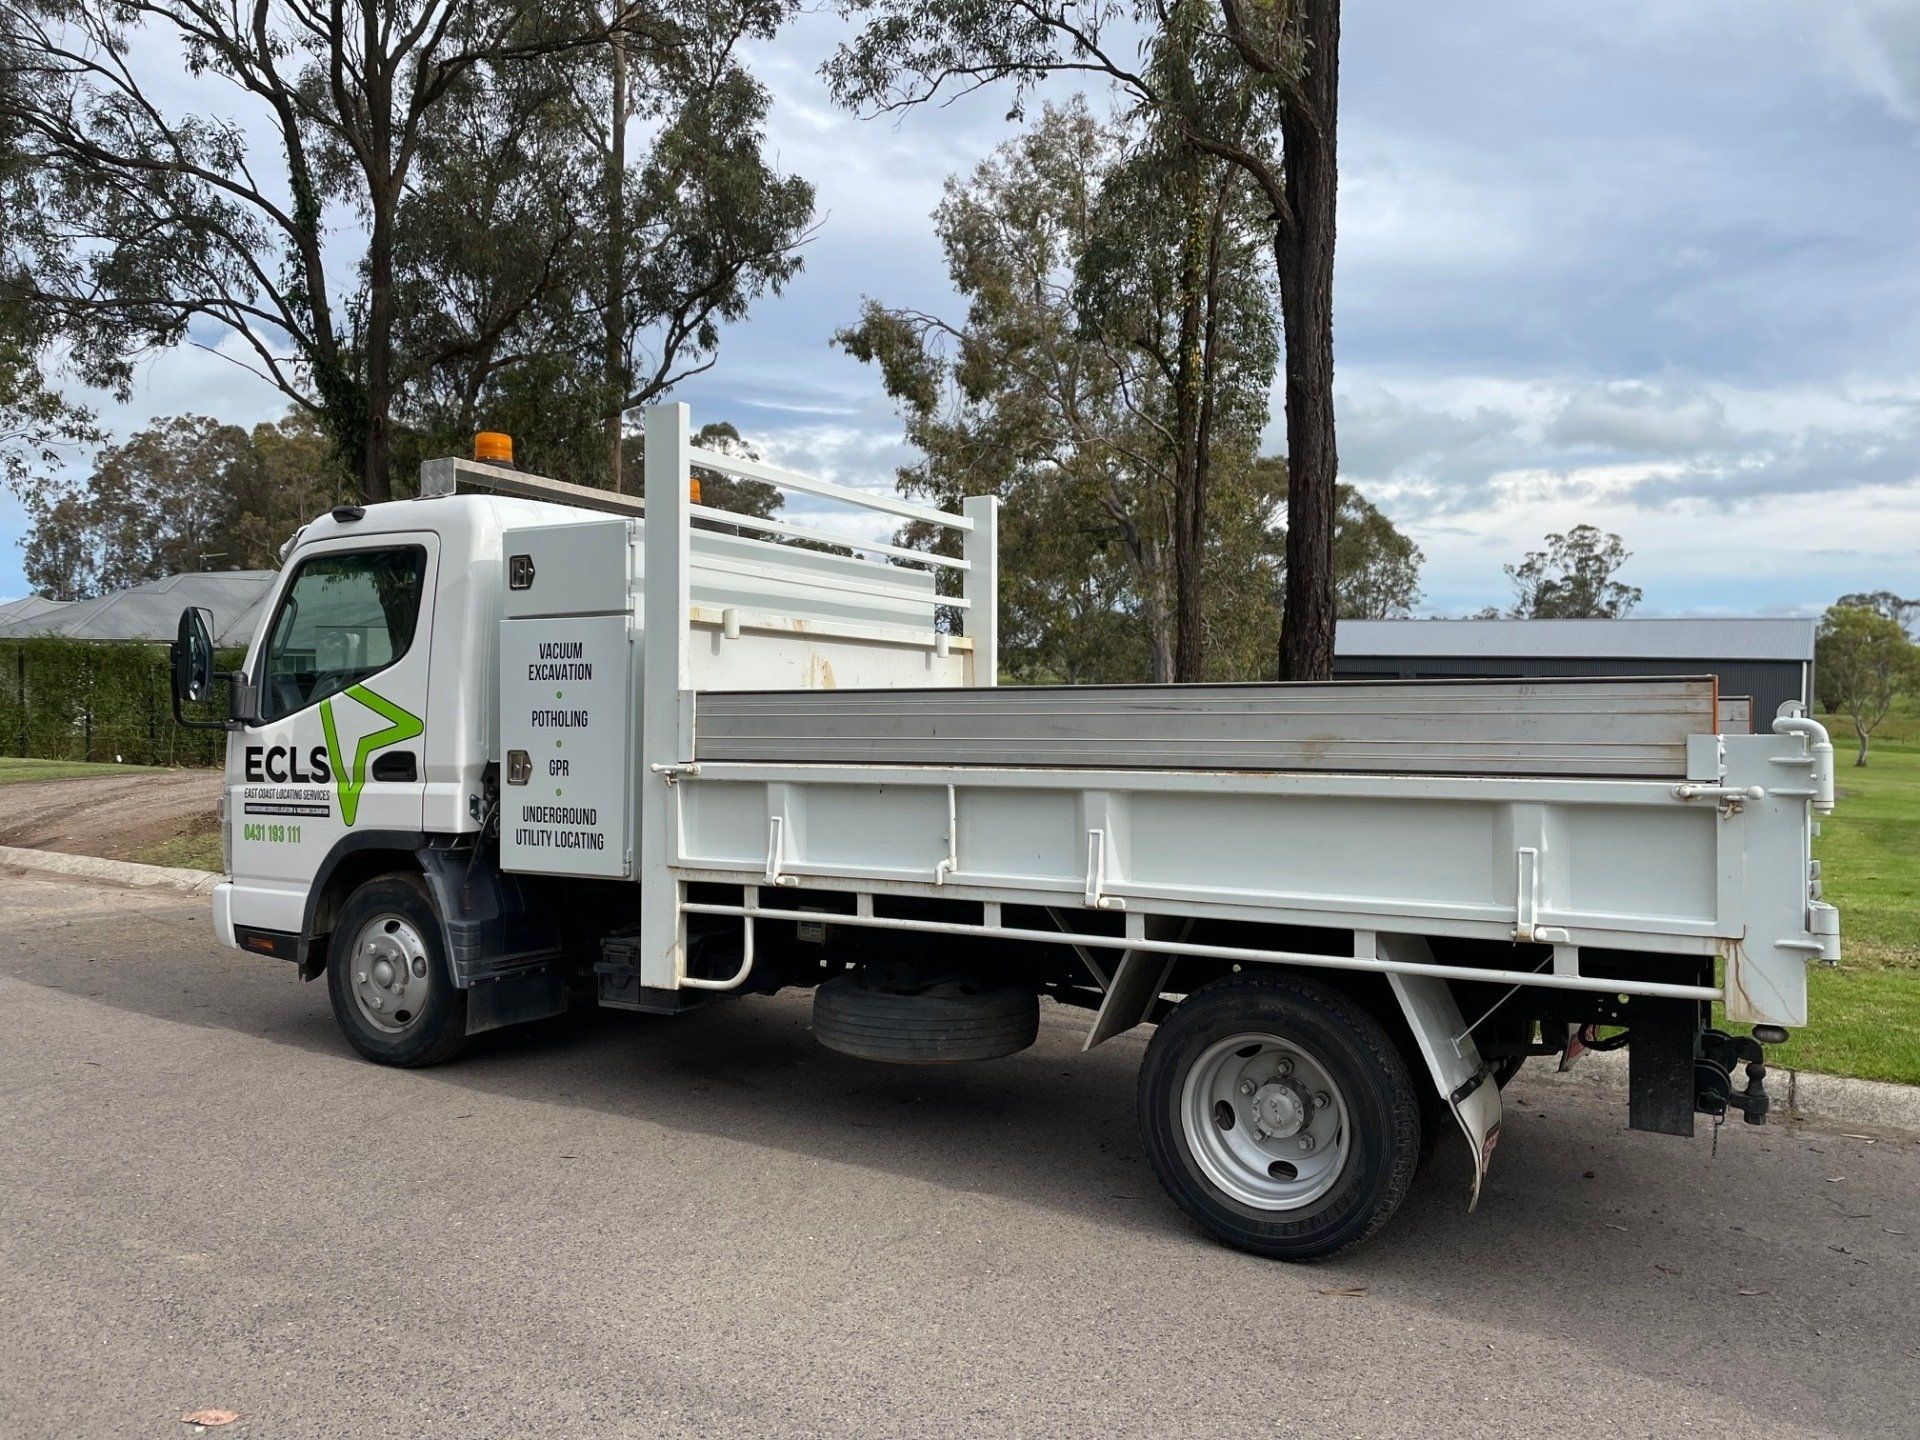 Company Truck — East Coast Locating Services in Wallalong, NSW